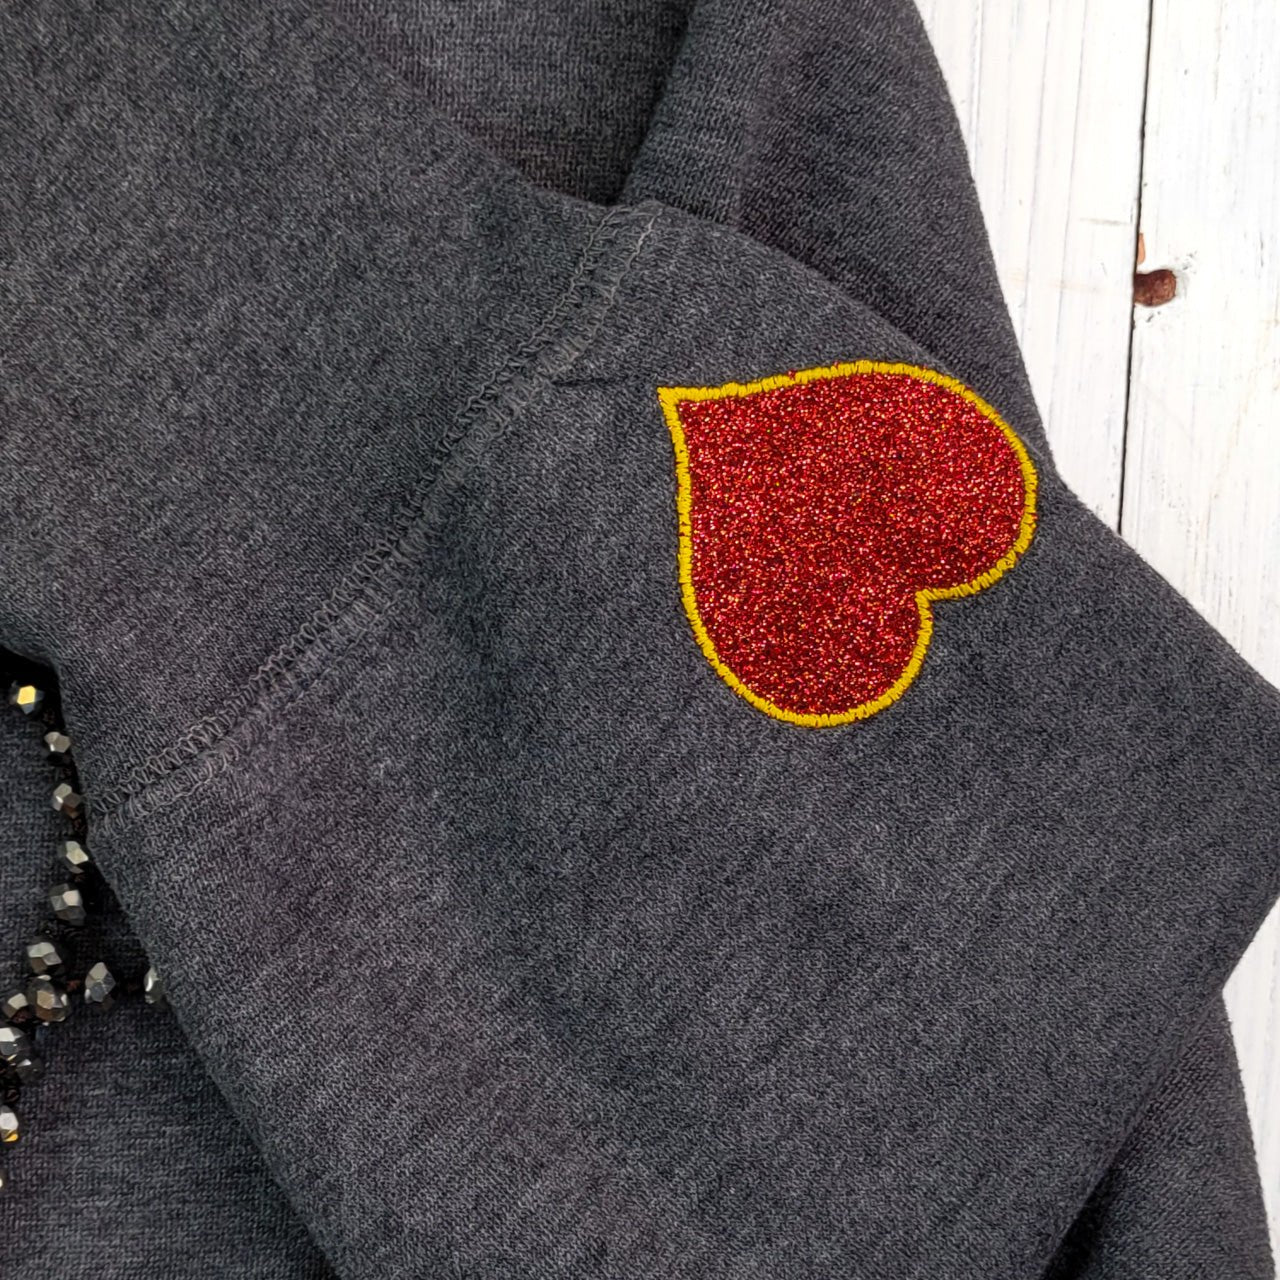 Kansas City Red & Gold Glitter Tackle Twill Ladies Drop Shoulder Sweatshirt - The Graphic Tee